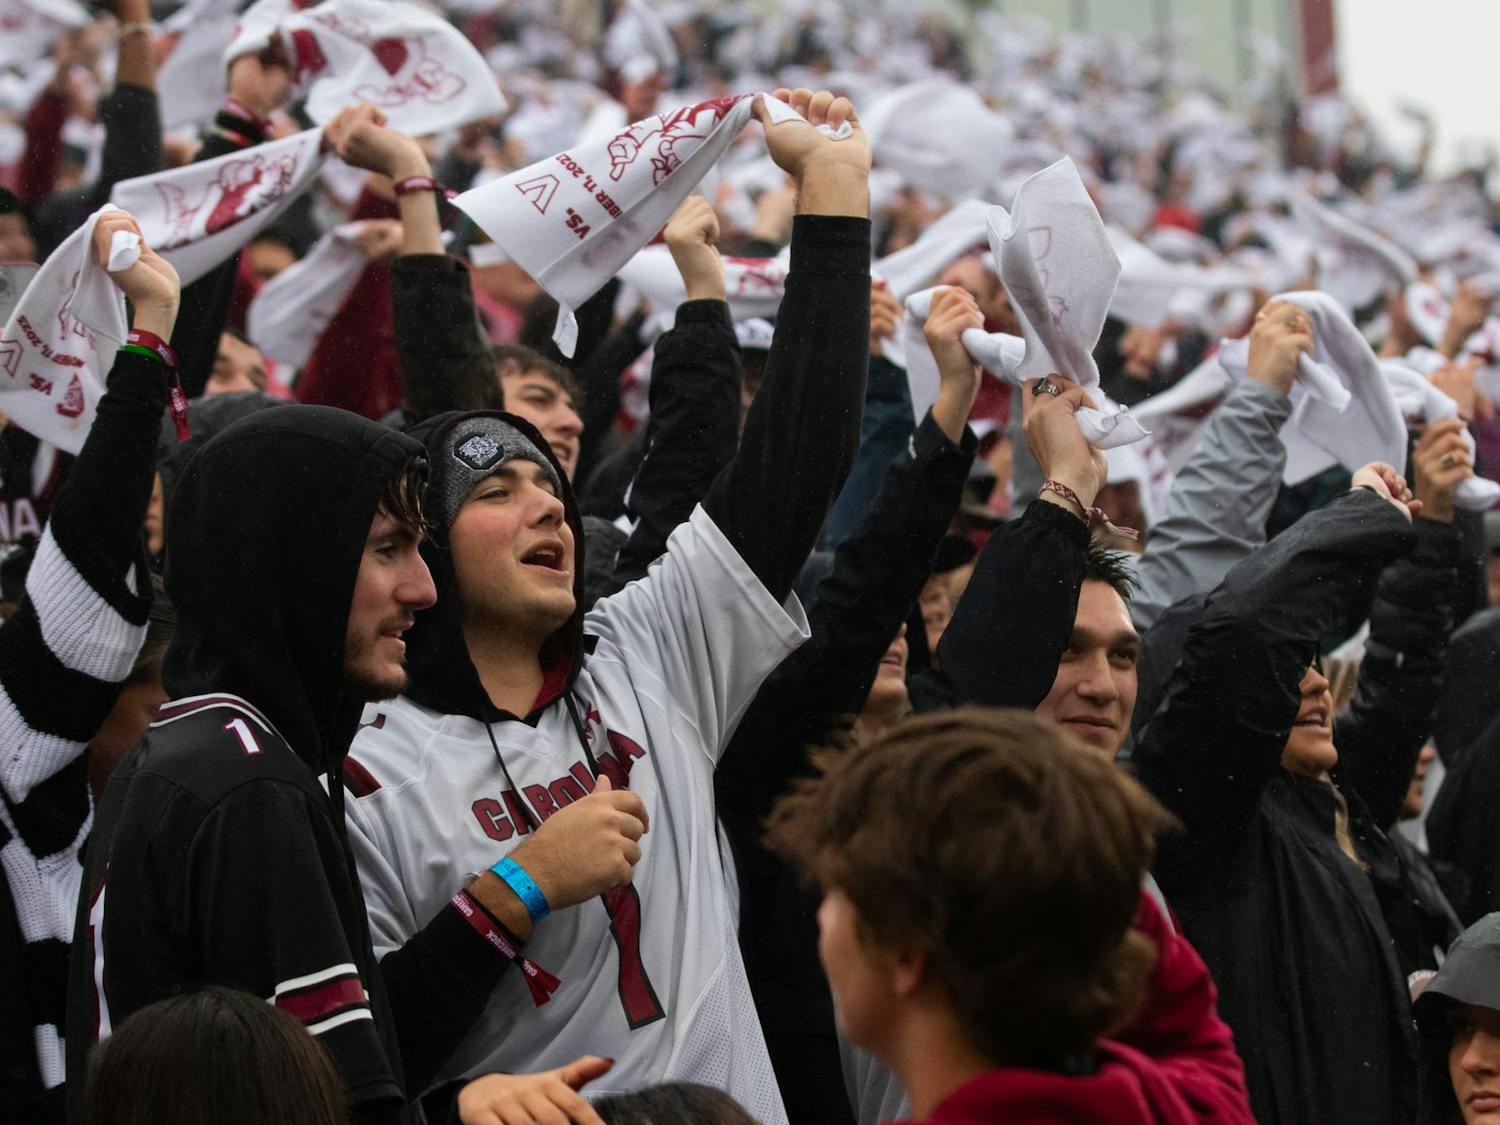 Students wave their rally towels as he song "Sandstorm" by Darude plays across Williams-Brice Stadium. Fans gathered in the rain Saturday to watch the SEC matchup between the Gamecocks and the Commodores.